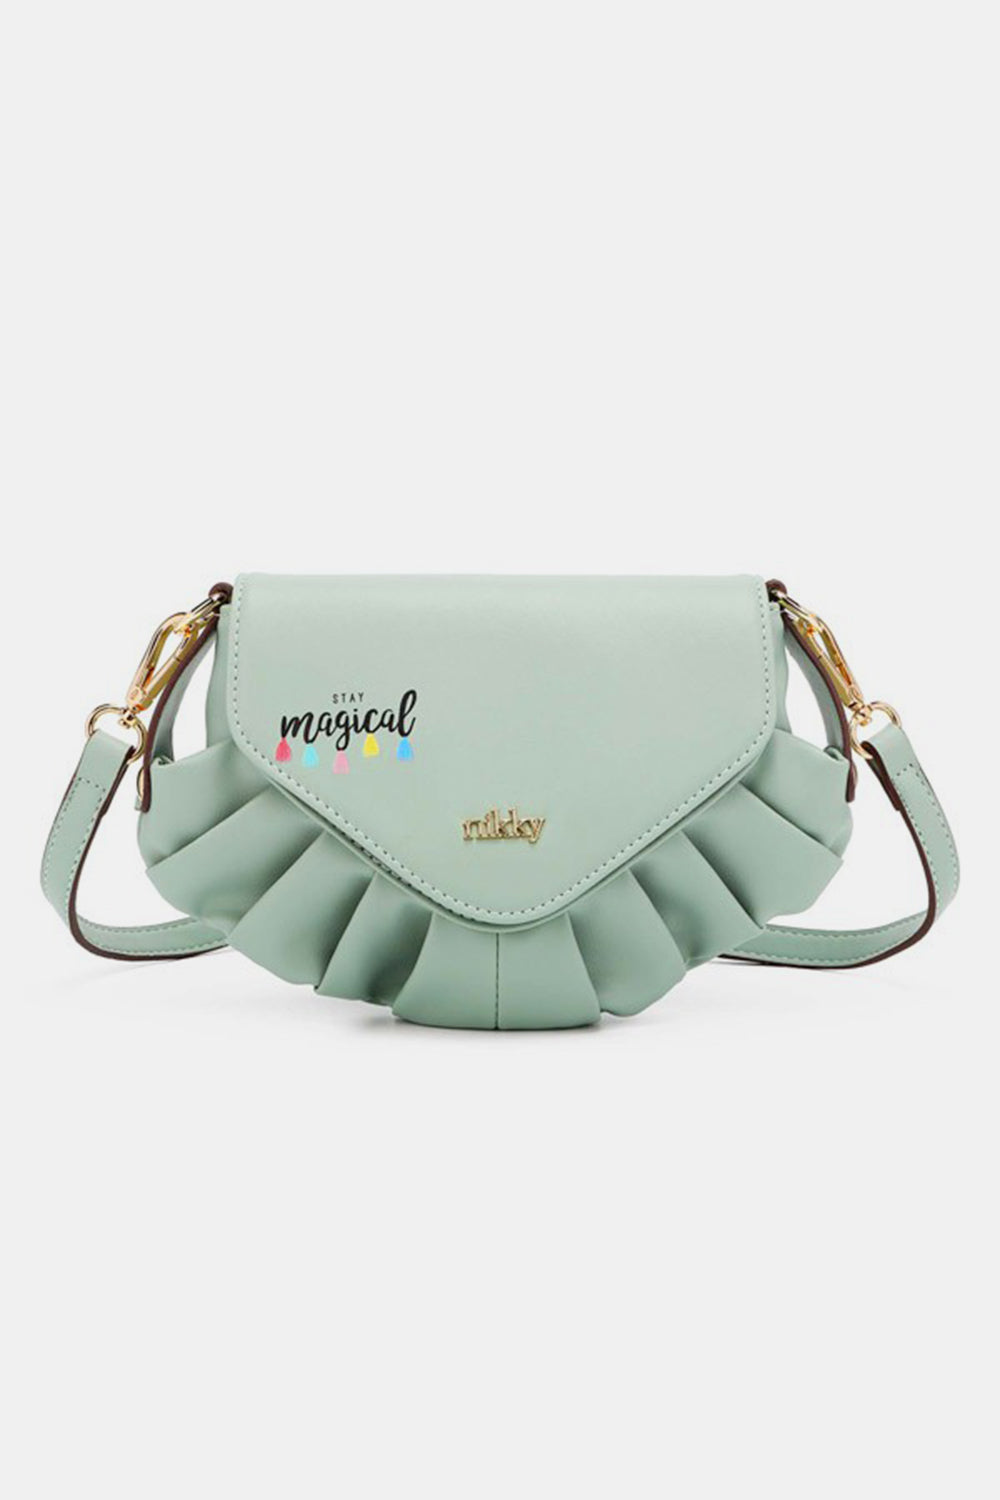 Nicole Lee USA Graphic Crossbody Bag Candy Mint One Size 